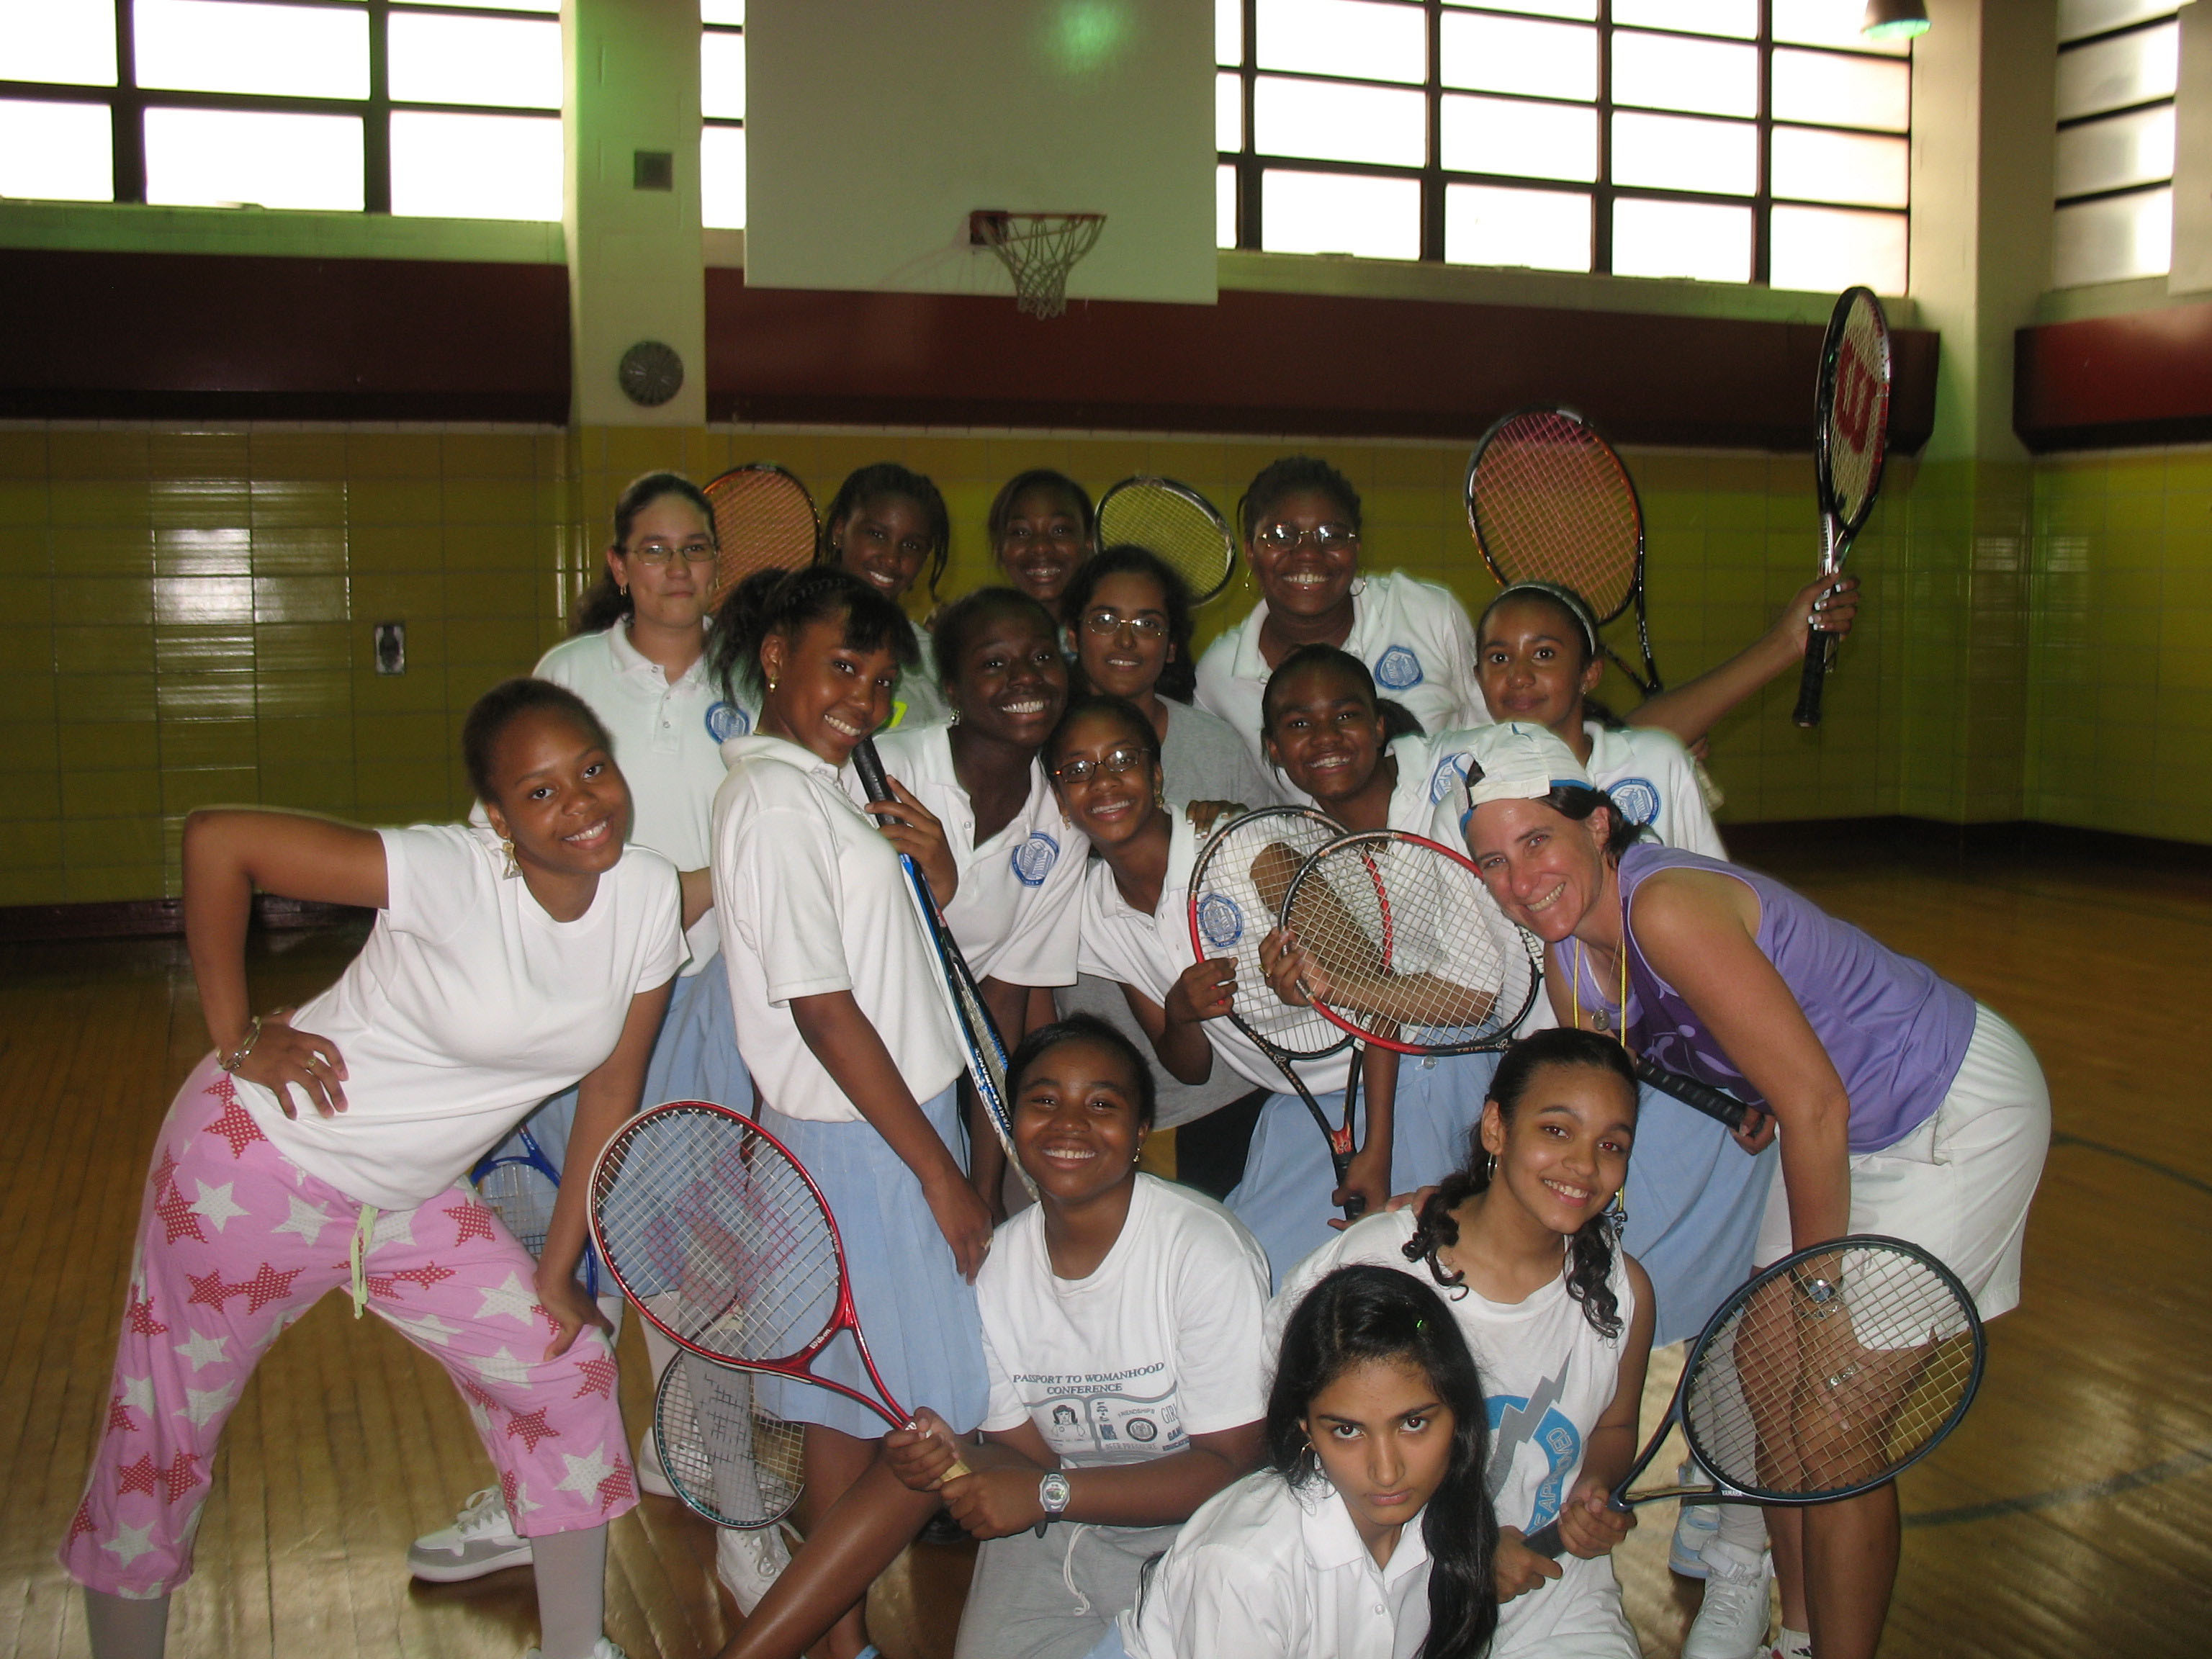 Ellen Markowitz with the 7th-grade girls holding tennis racquets smiling for the camera